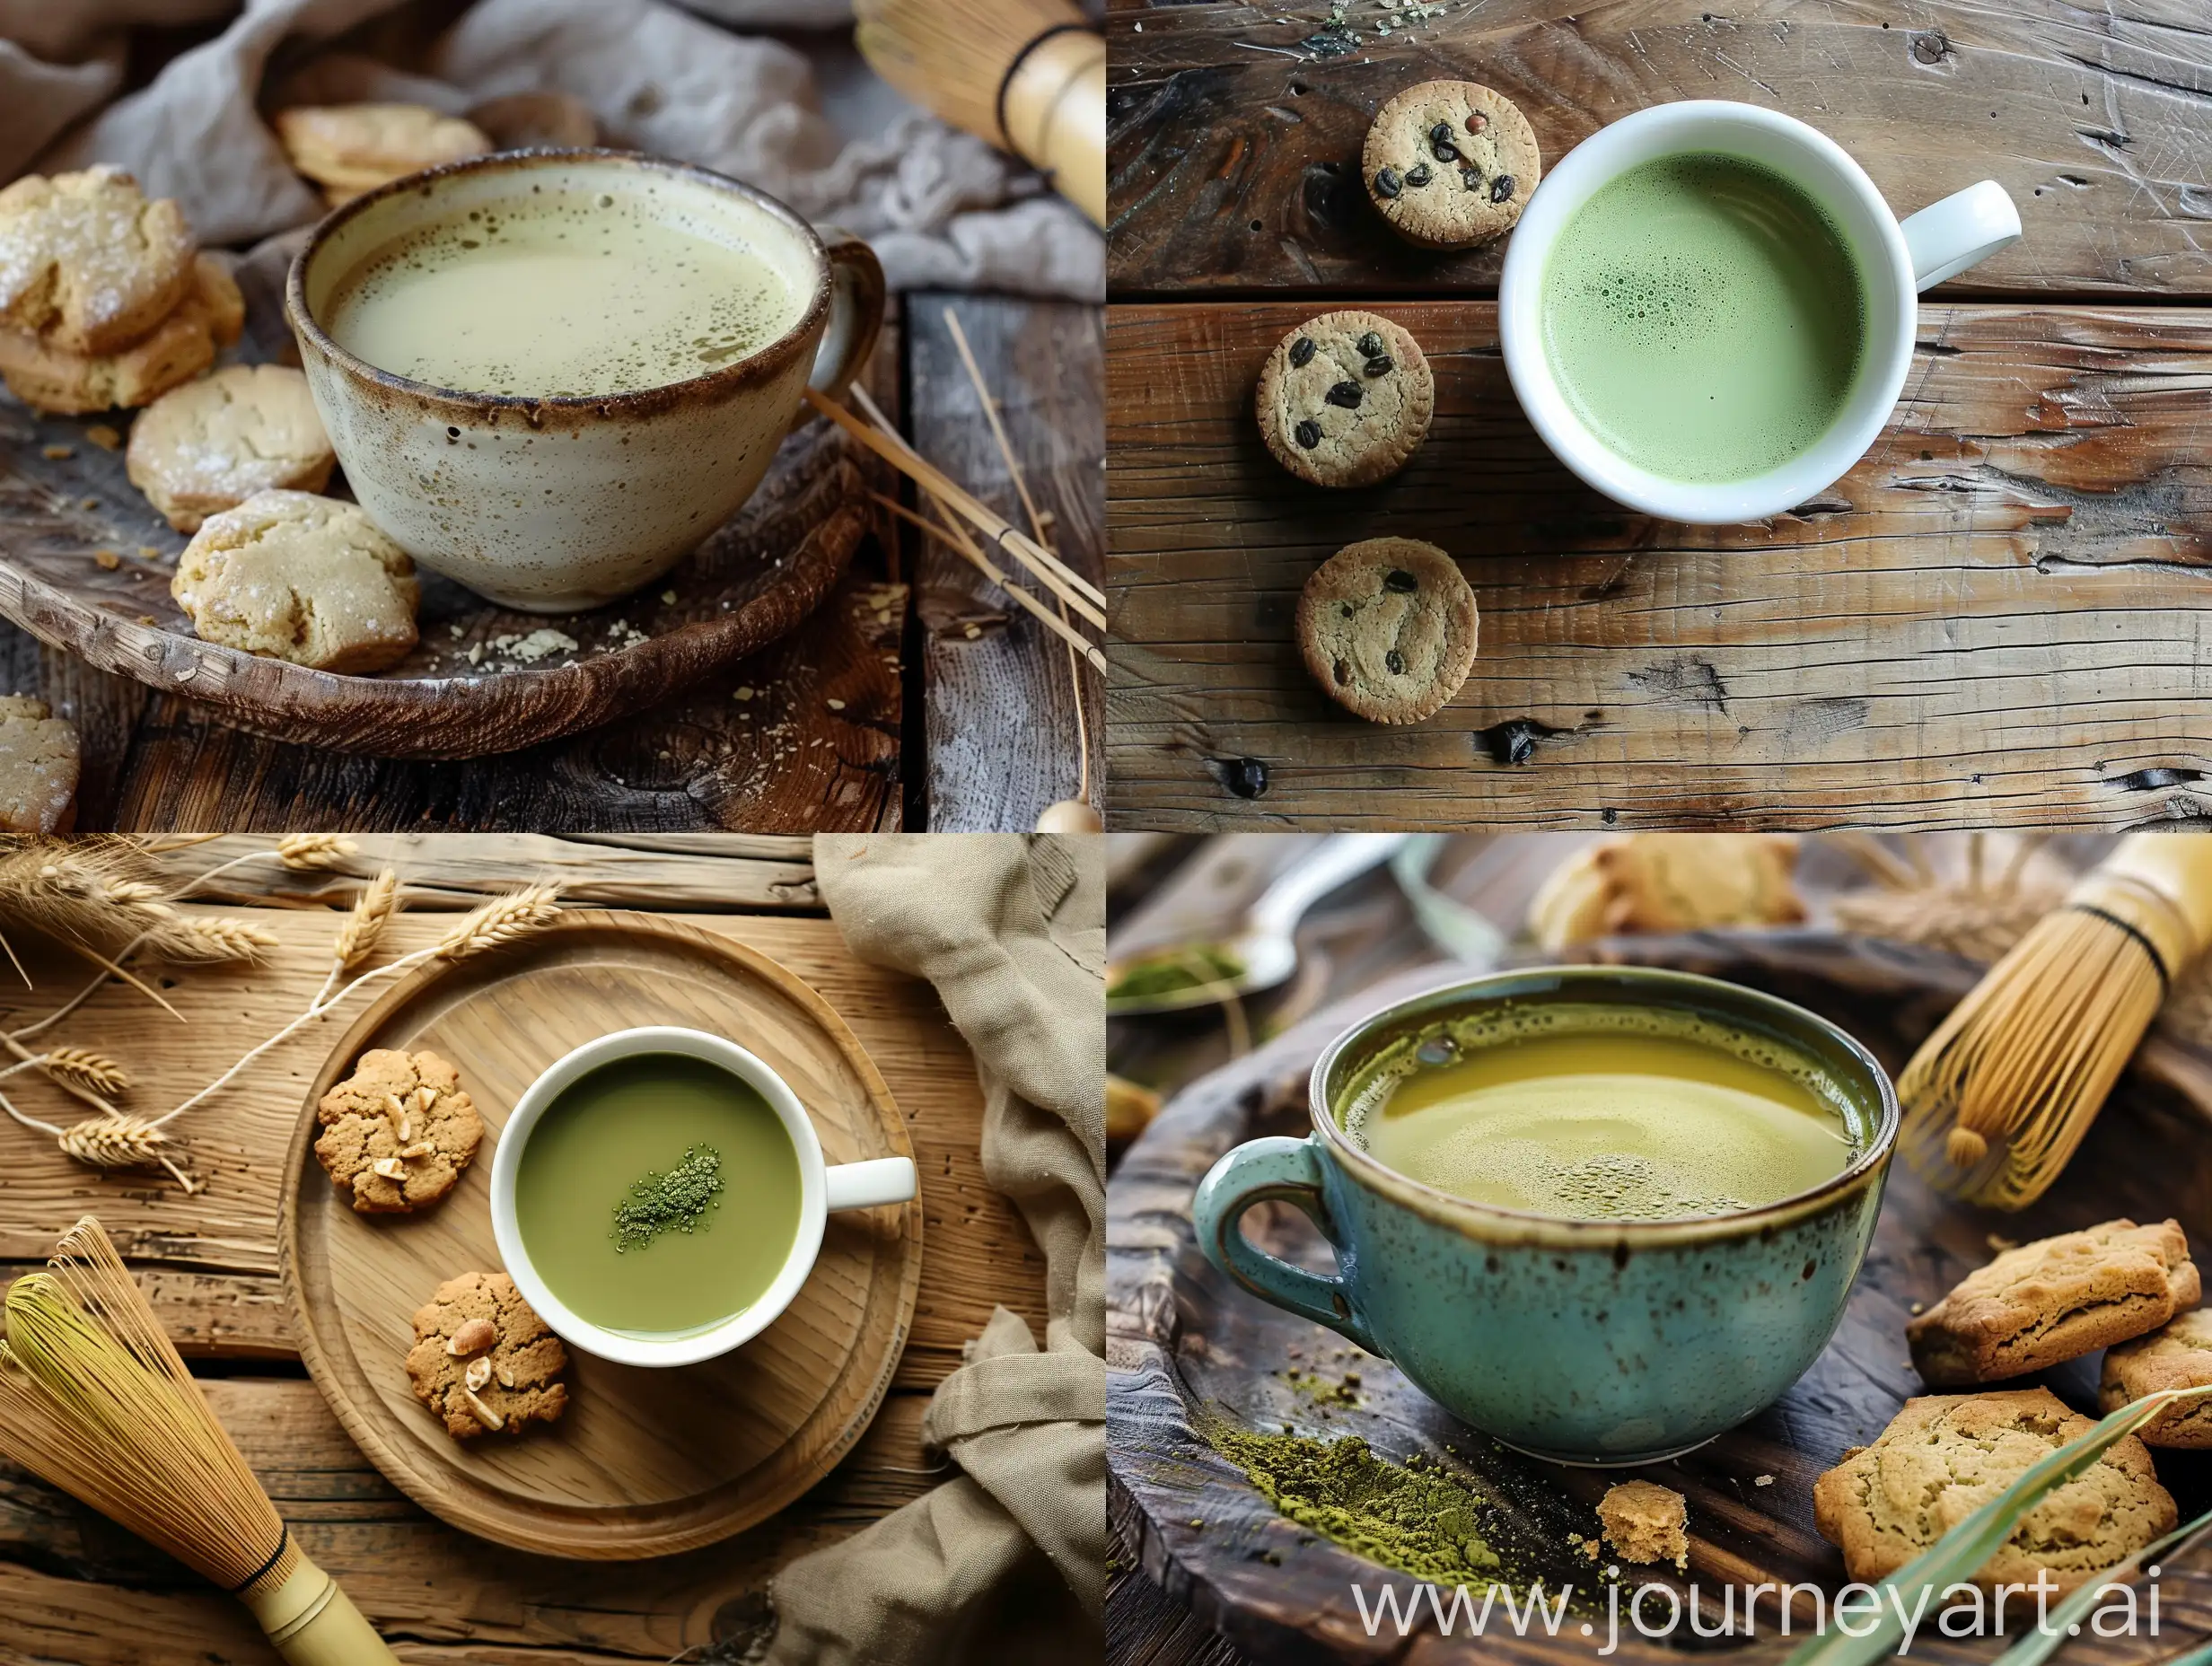 Photo of a cup of matcha on a wooden table with biscuits